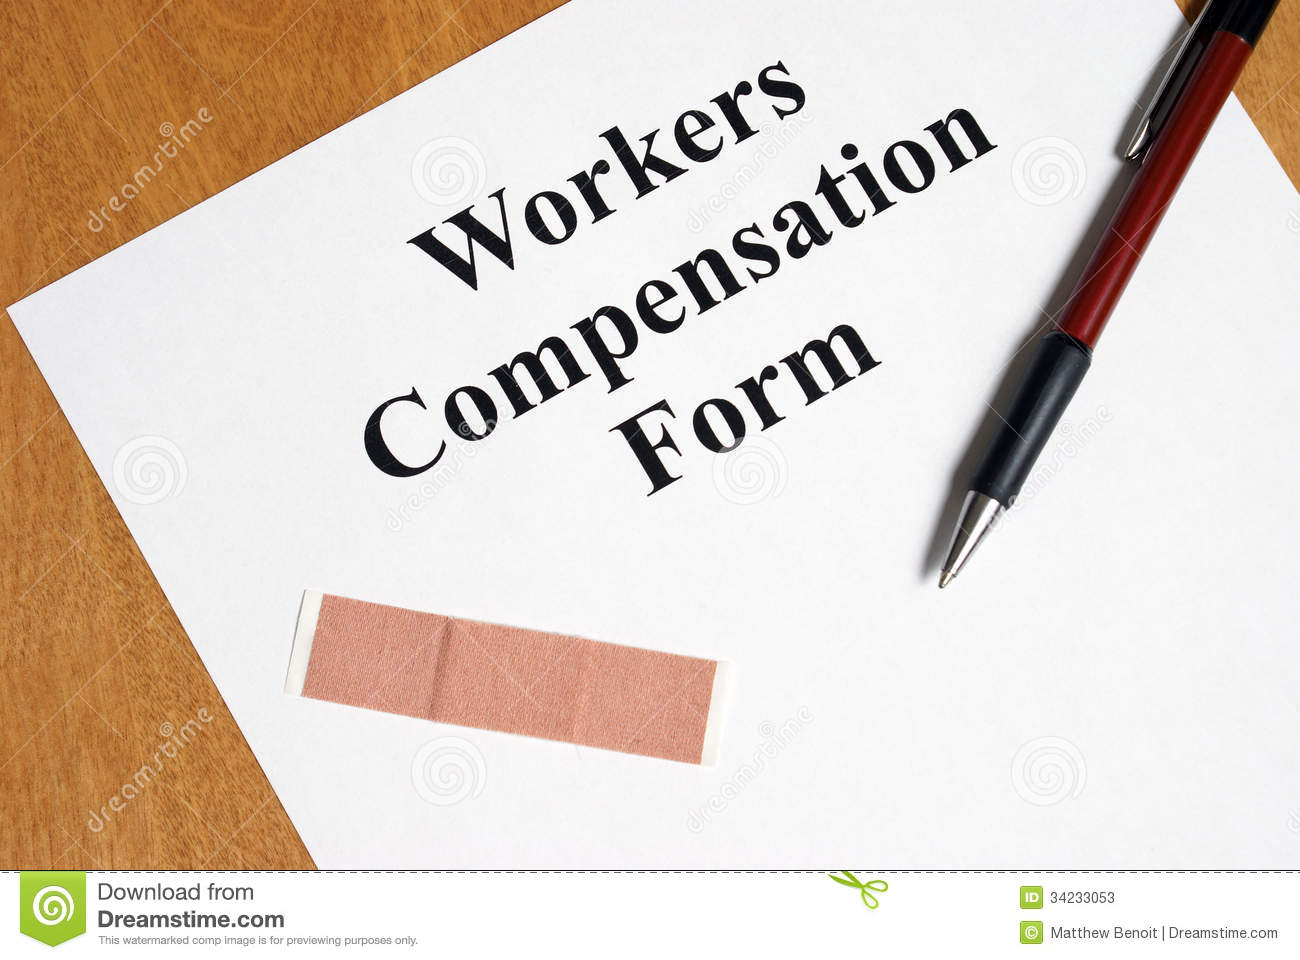 Workers Compensation Clipart Workers Compensation Stock Photos   Image    